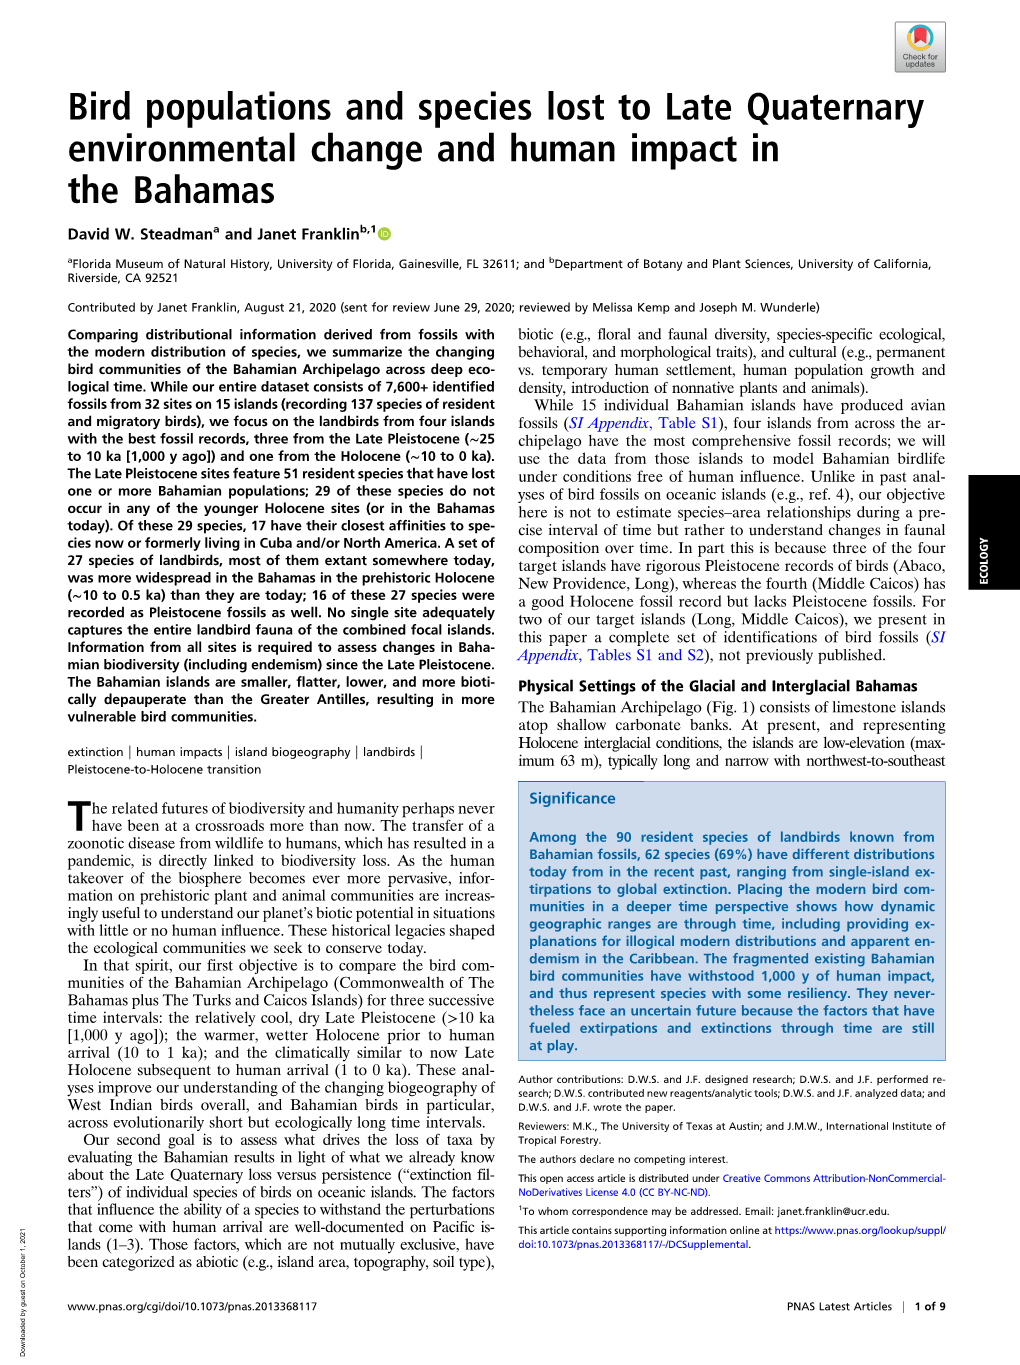 Bird Populations and Species Lost to Late Quaternary Environmental Change and Human Impact in the Bahamas